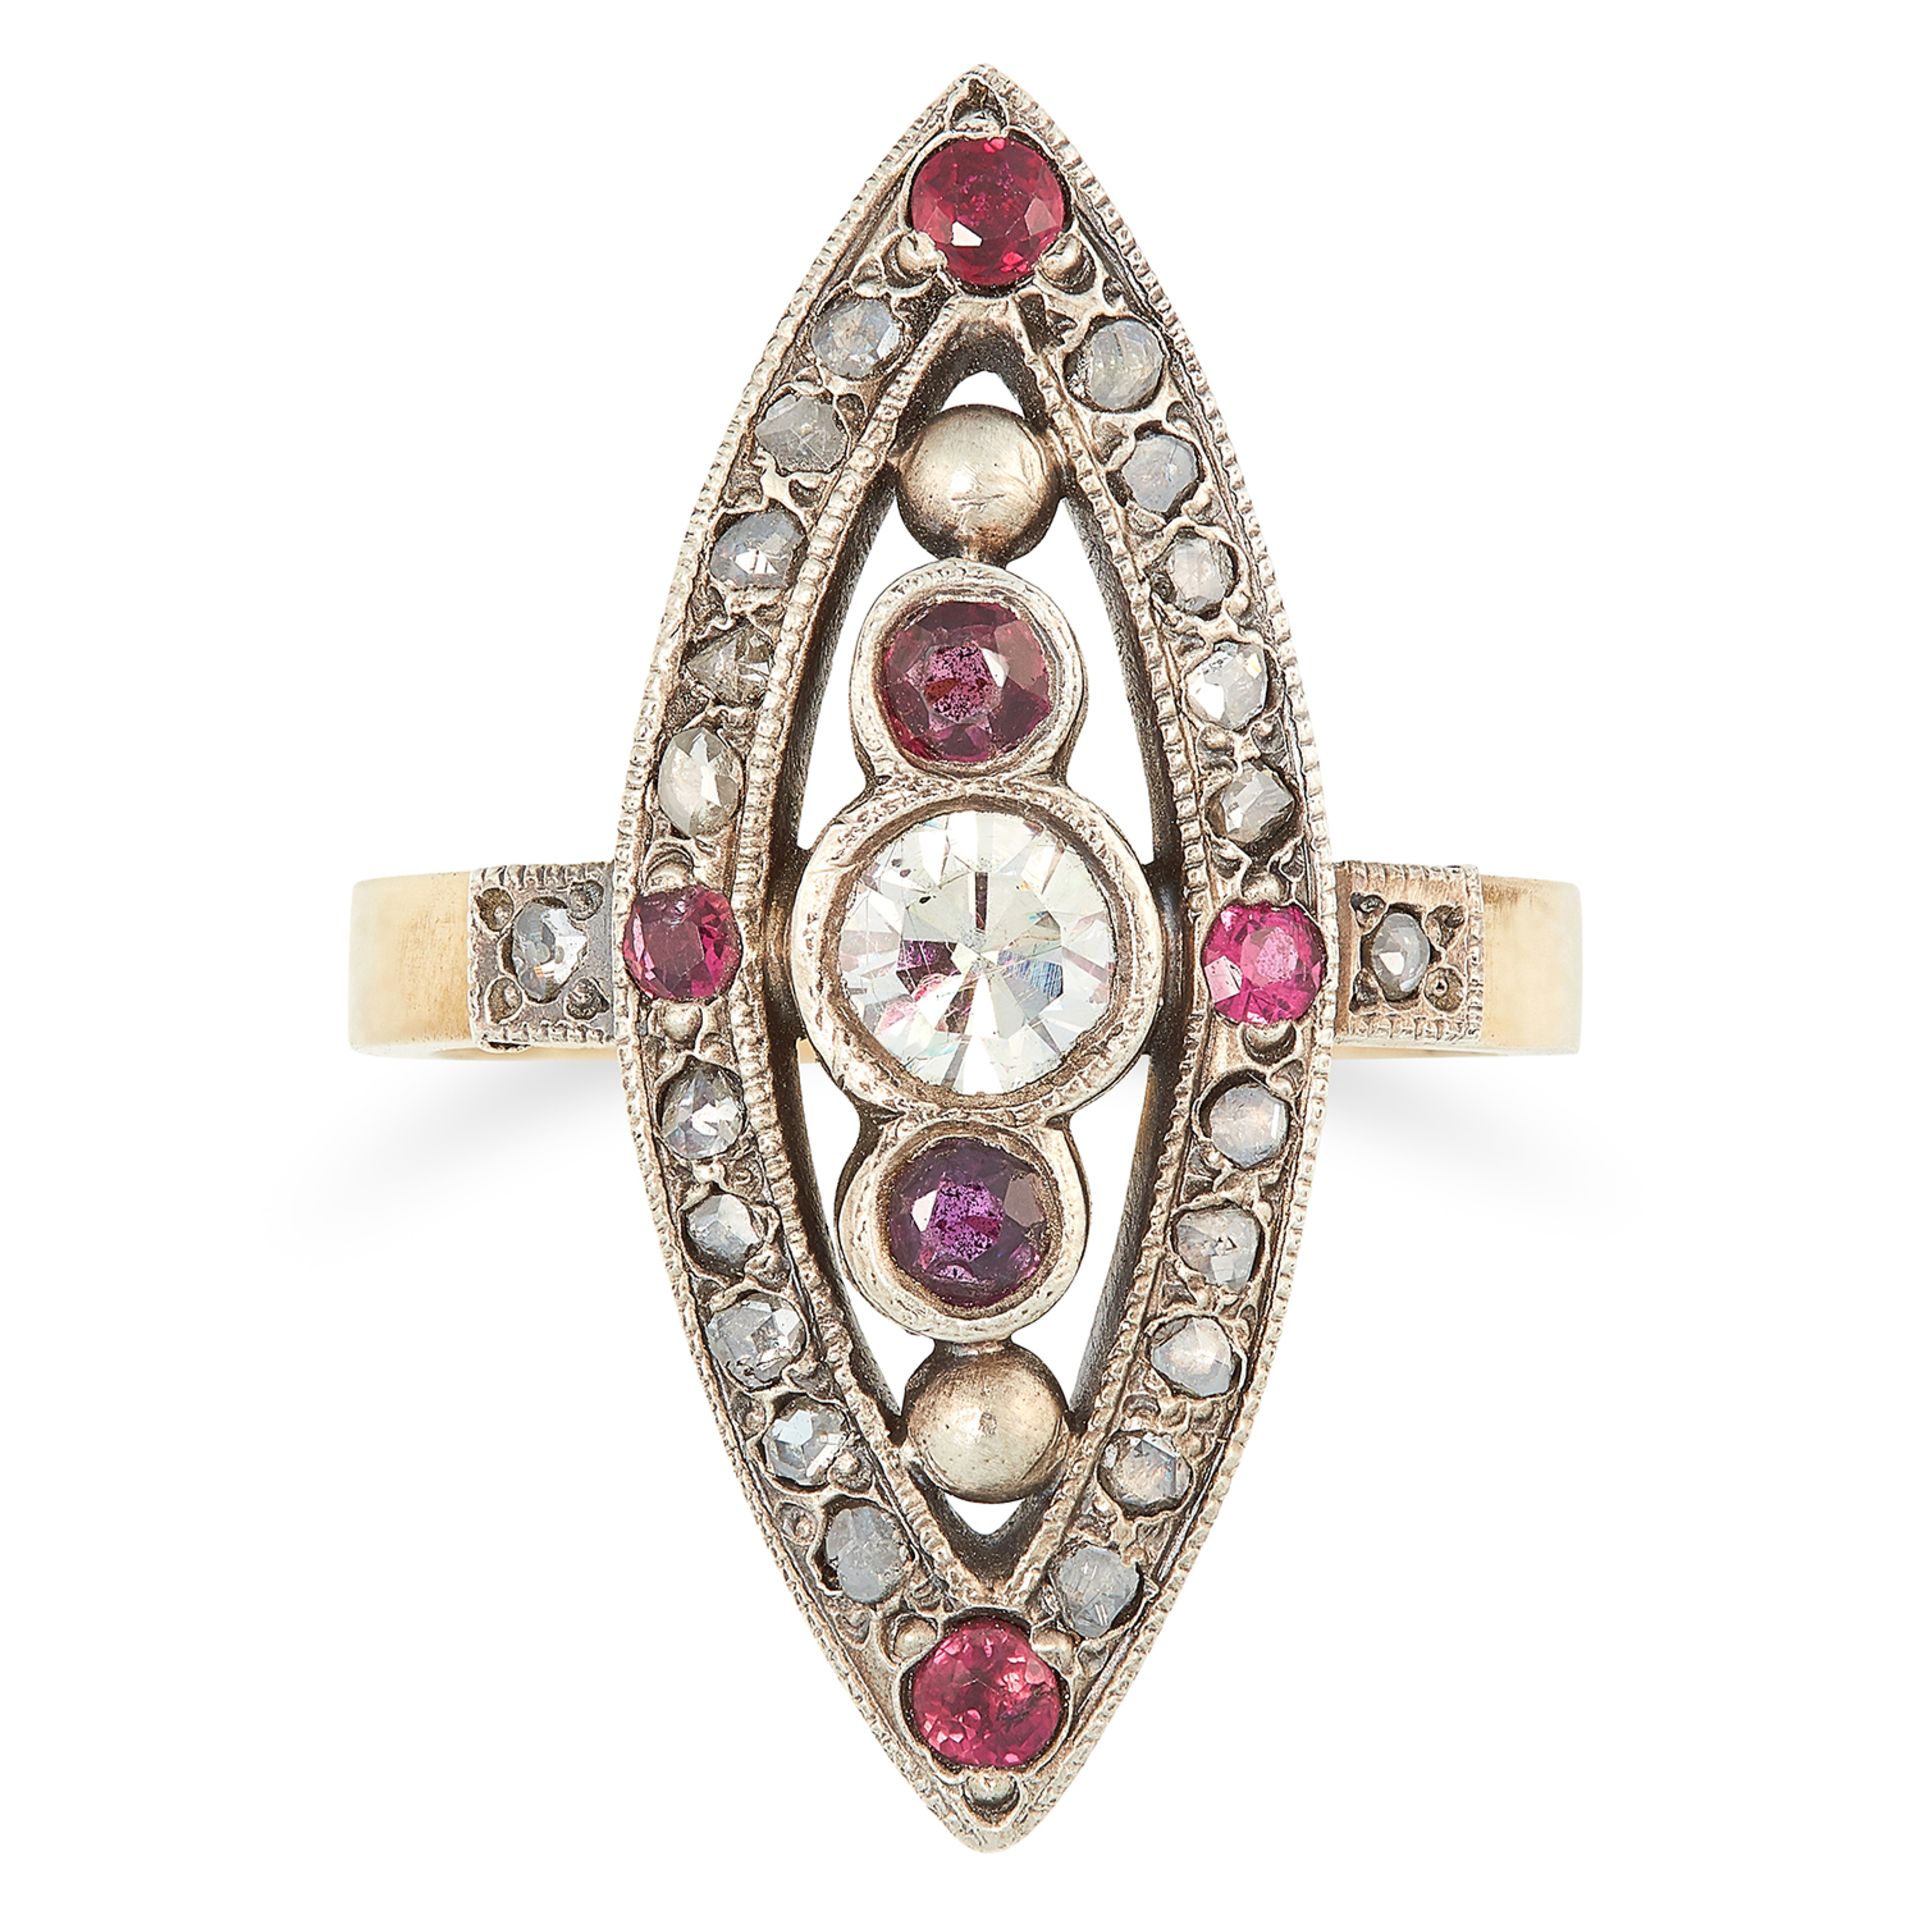 RUBY AND DIAMOND NAVETTE RING set with round cut rubies, a central round cut diamond and rose cut